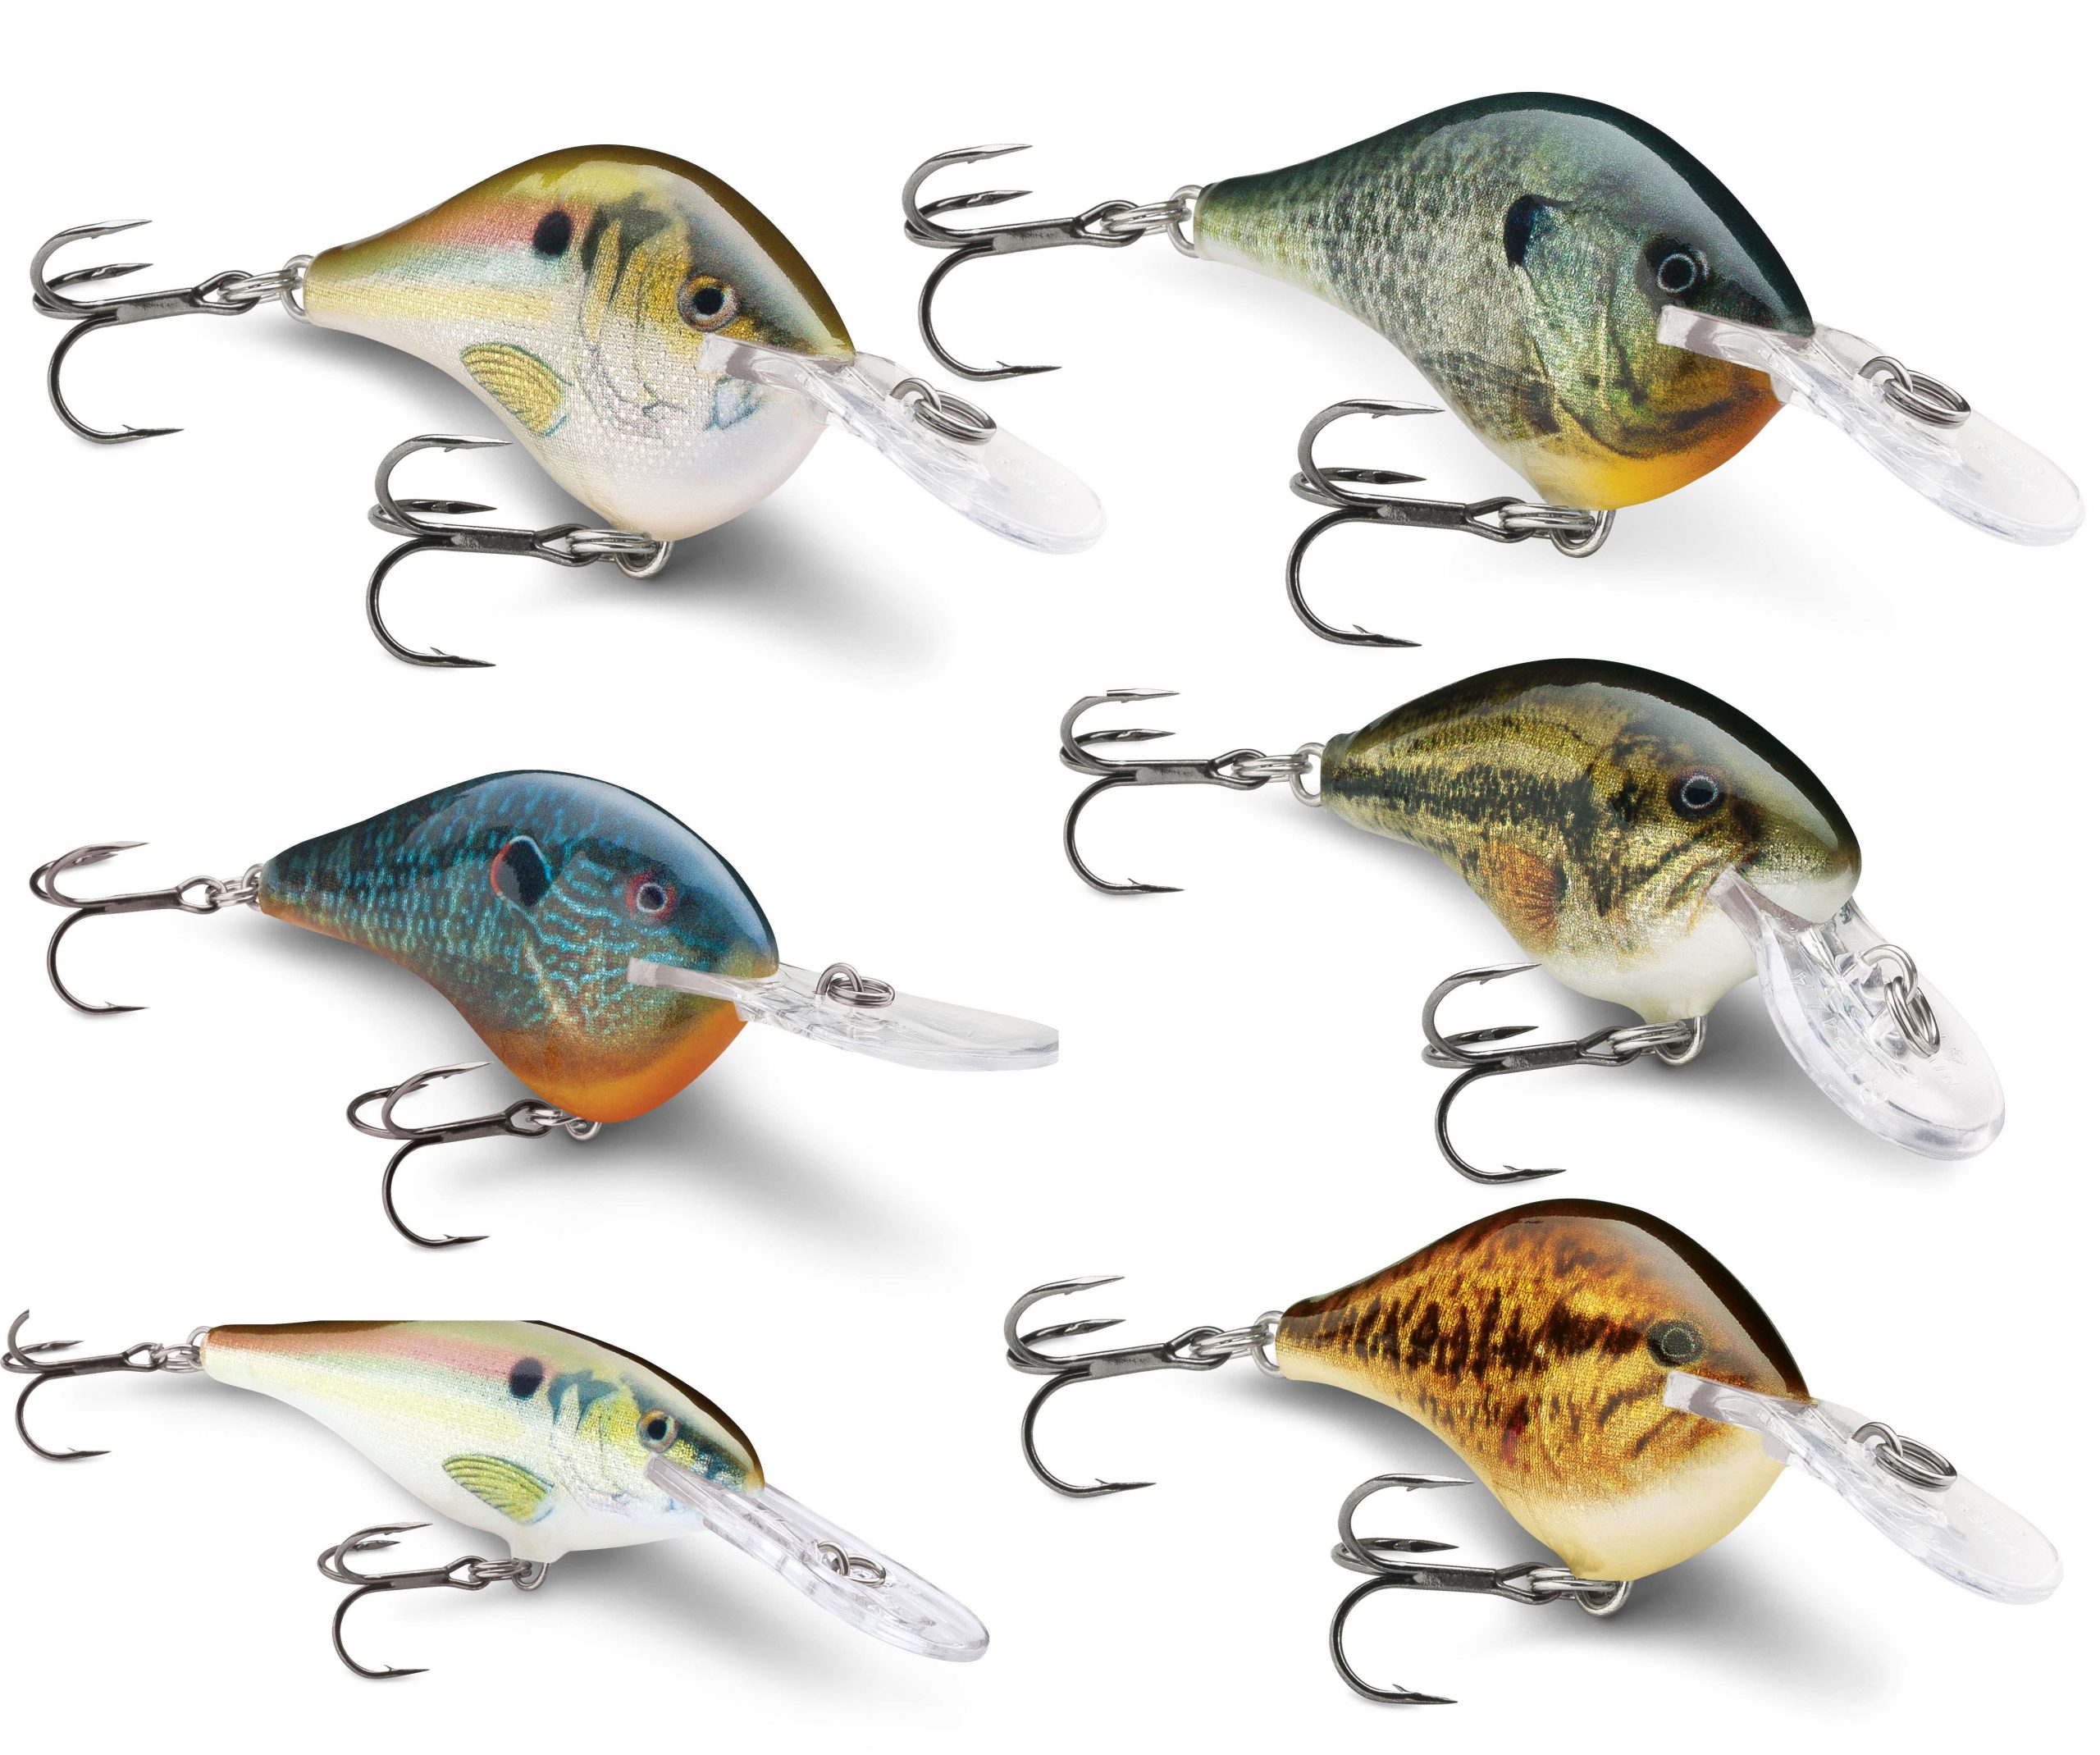 <b>Rapala</b><BR>
Custum HD colors<BR>
Created in perfect detail, the new advanced Custom HD (High Definition) finishes are the newest innovation from Rapala. Look closely: the depth of the finish, the color and scale detailing, the reflection of the classic Rapala foil. DT Series, Scatter Rap Shad & Scatter Rap Minnow, the Shad Rap plus the Original Floating Minnow are the first to feature this enhancement.</p>
